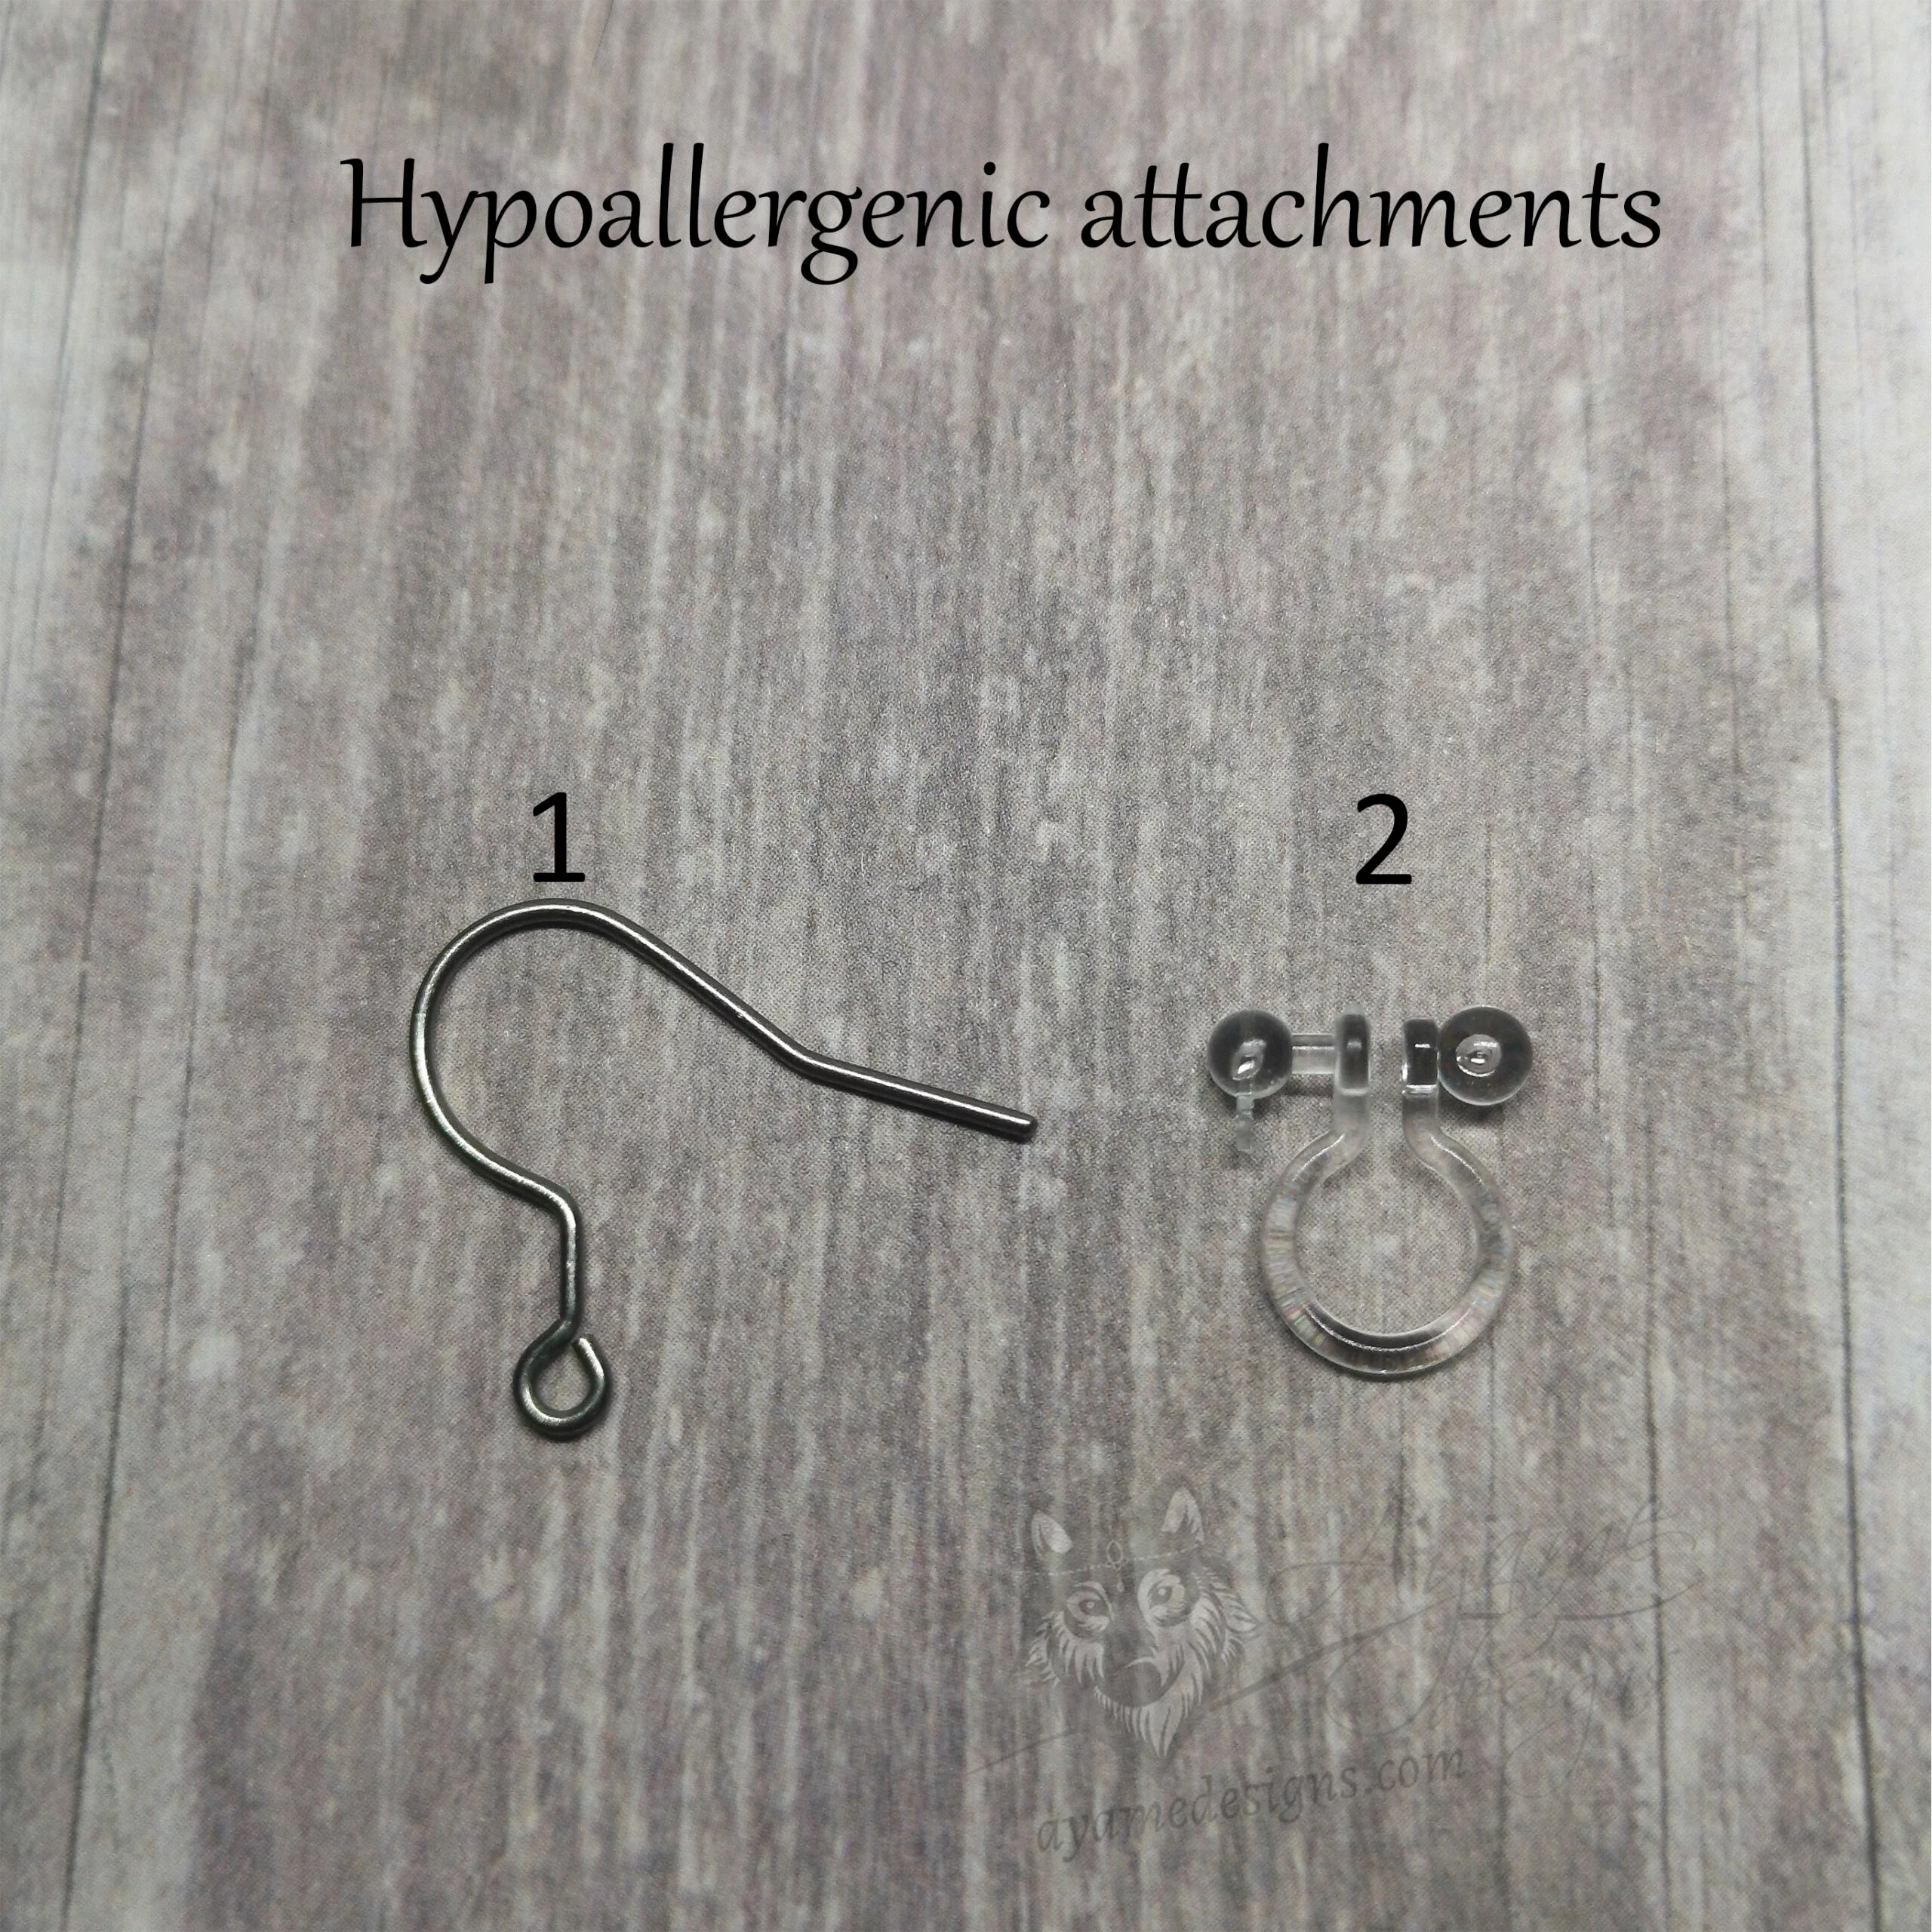 https://ayamedesigns.com/wp-content/uploads/2020/12/hypoallergenic-earring-attachments-scaled-jpg.webp